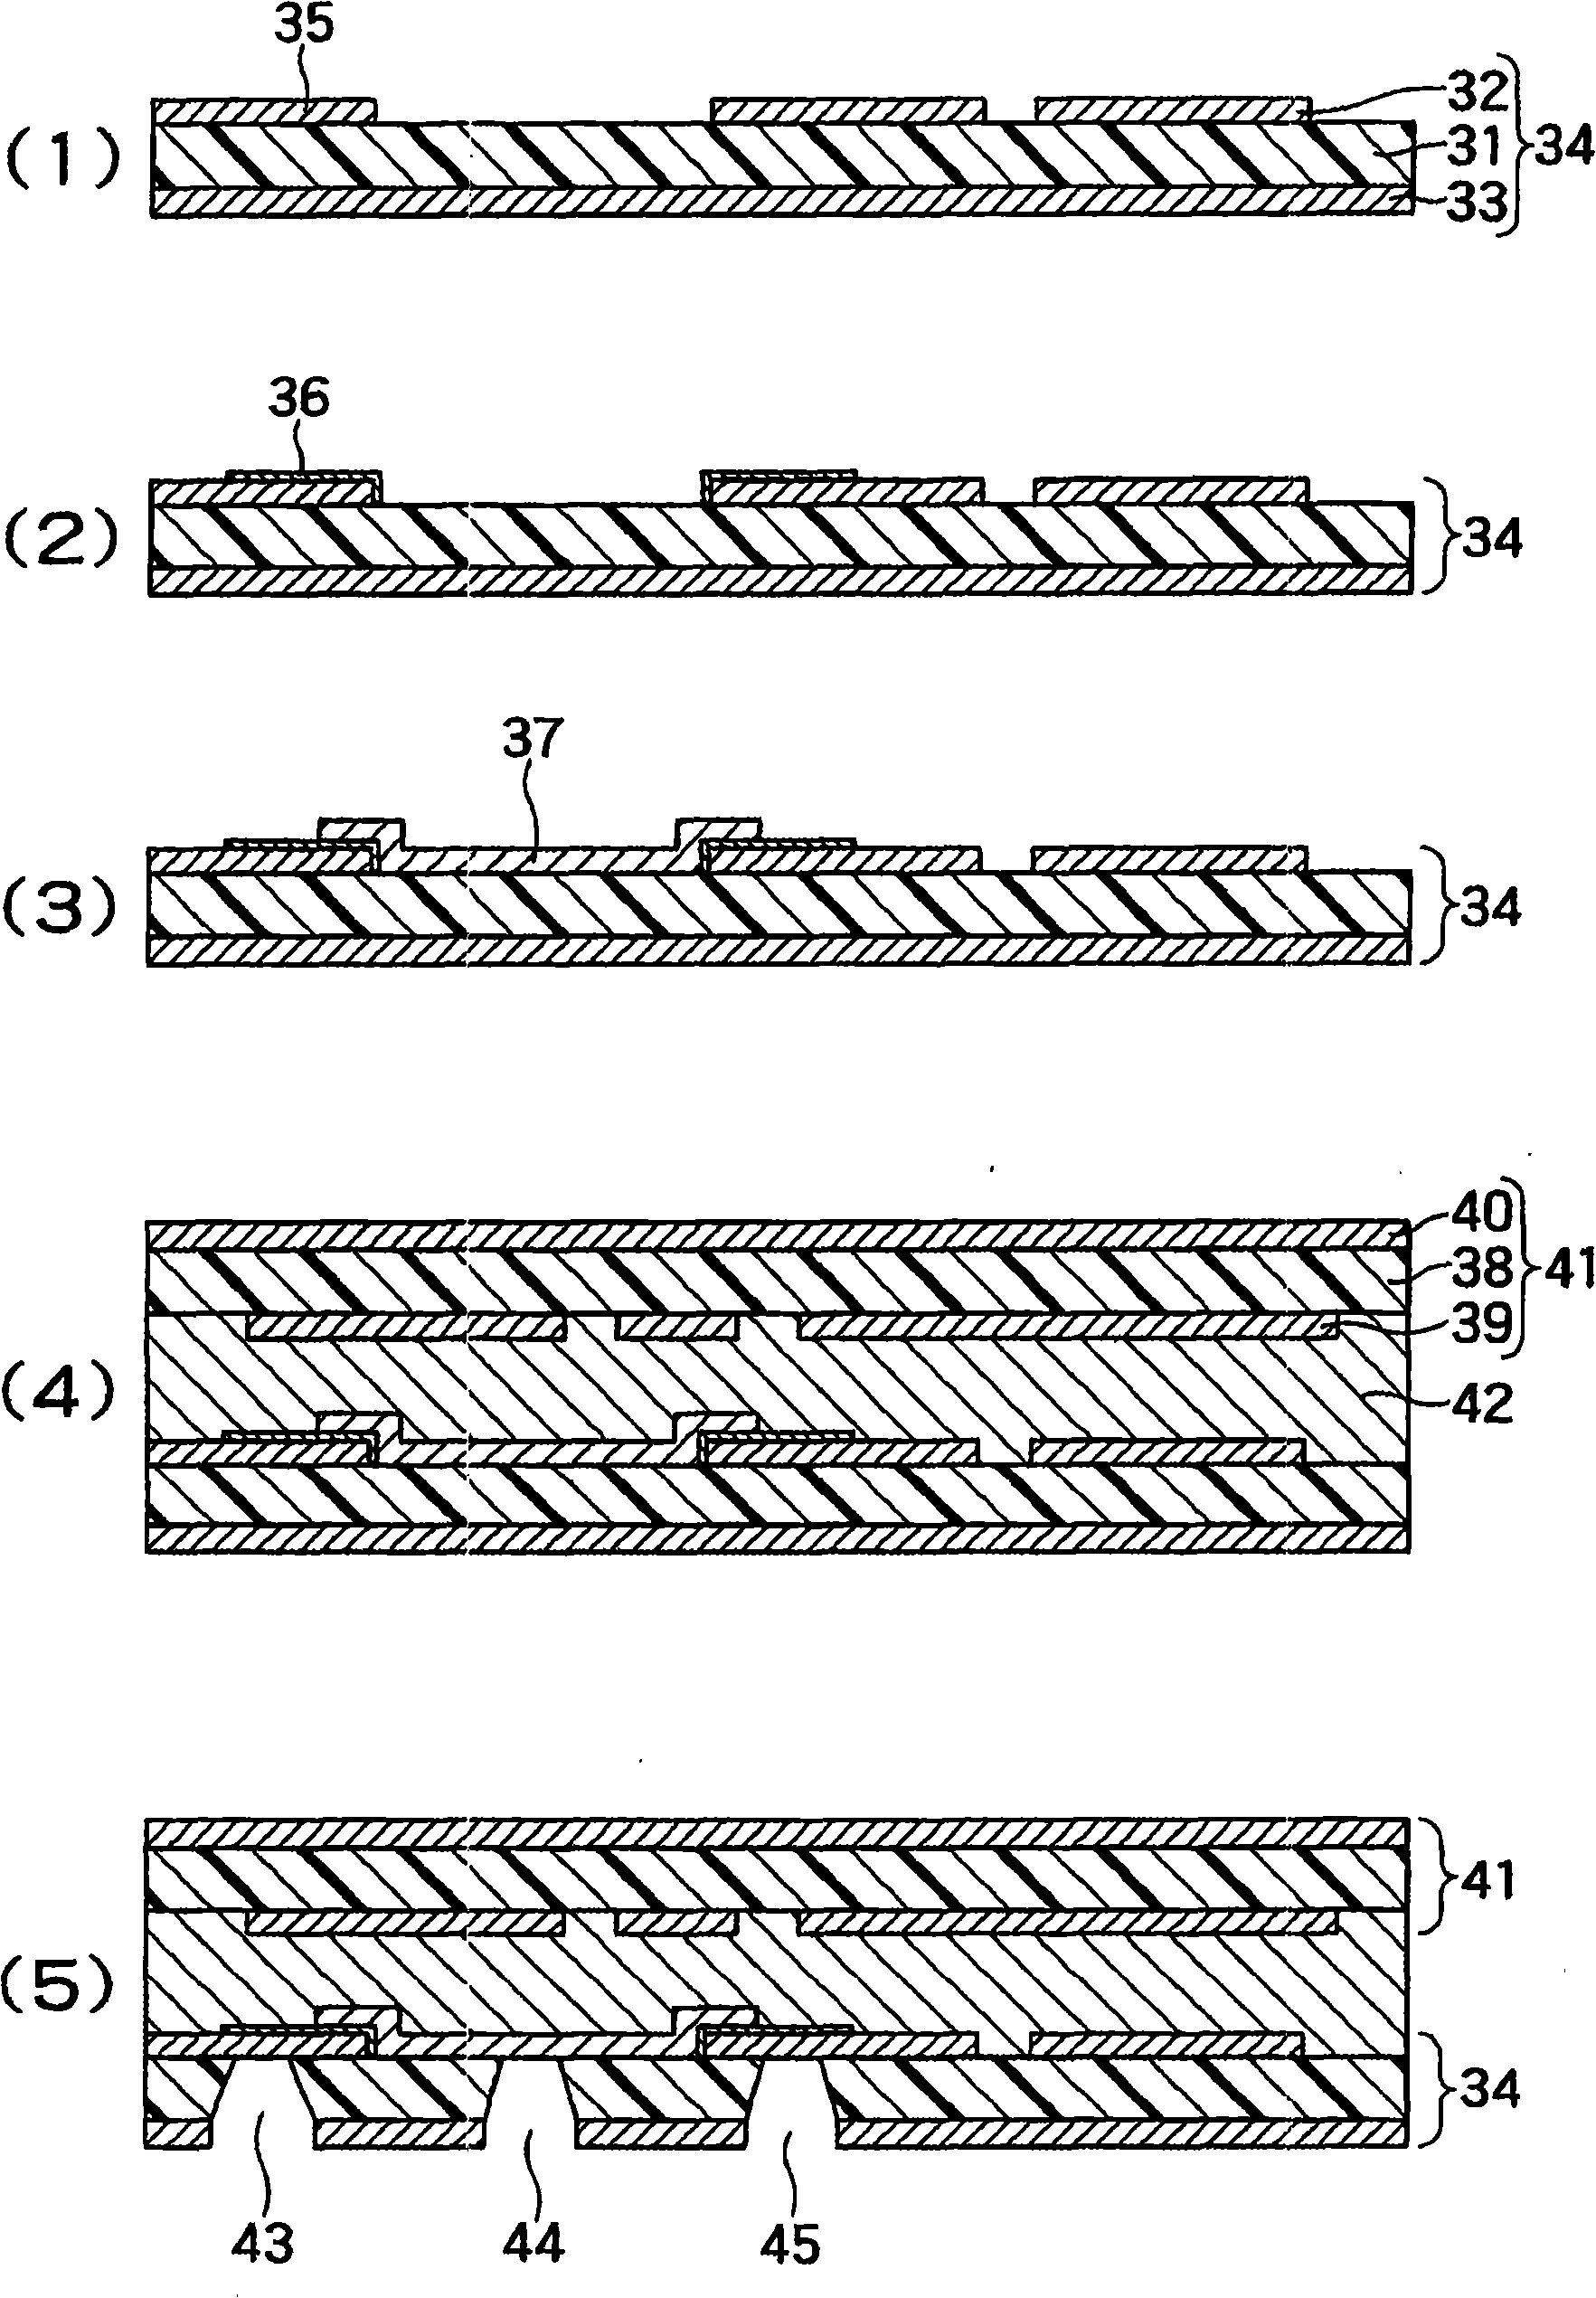 Method of producing printed circuit board incorporating resistance element